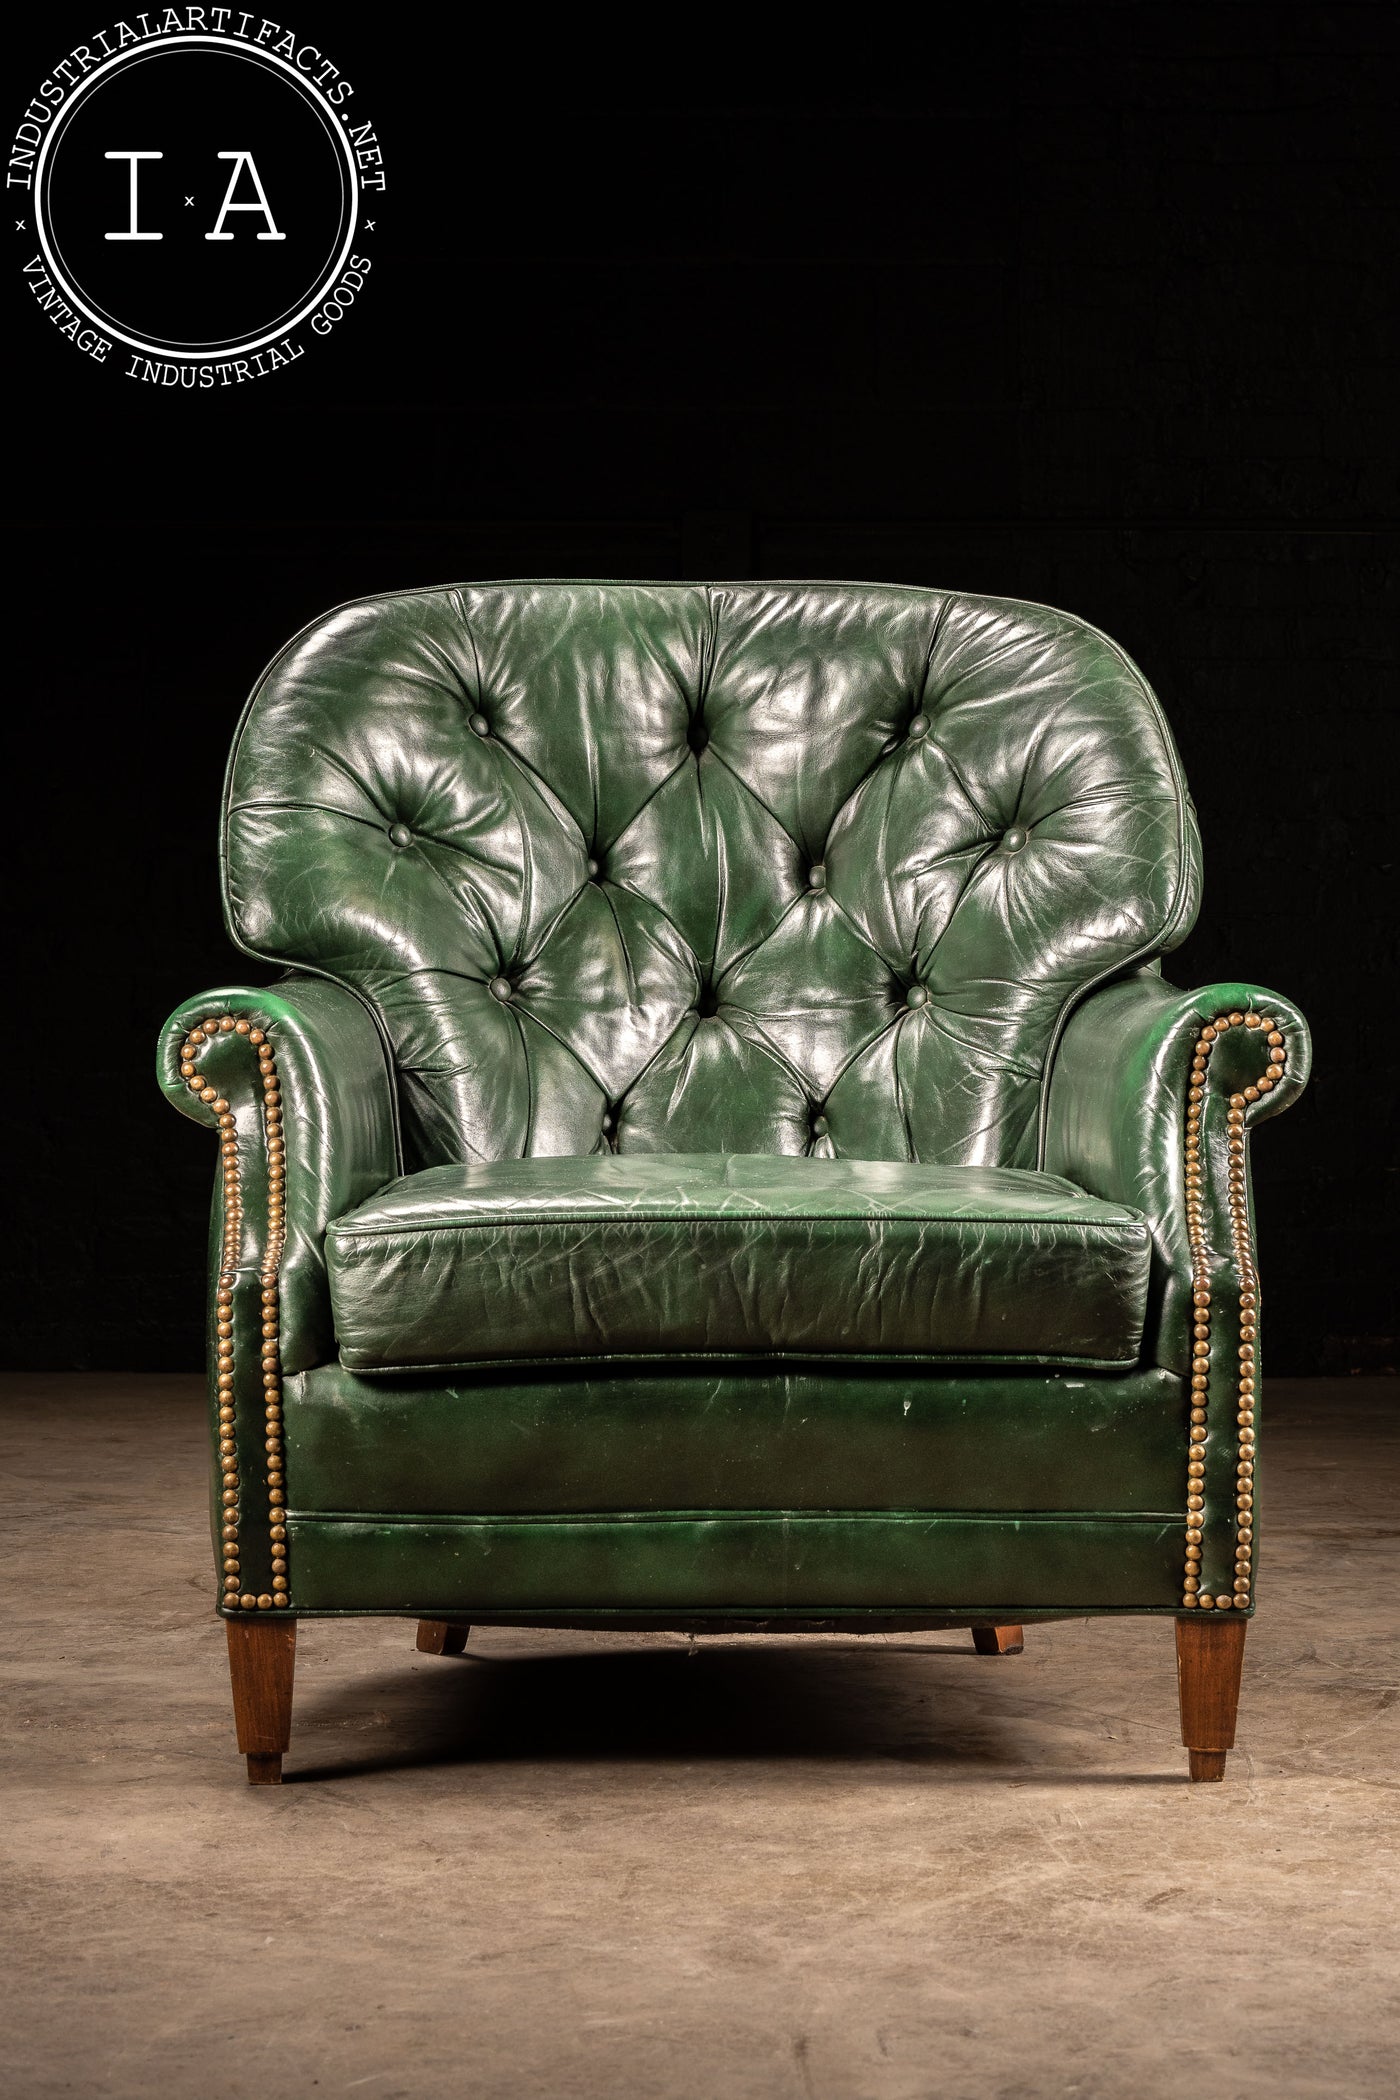 Vintage Tufted Leather Chair with Ottoman in Emerald